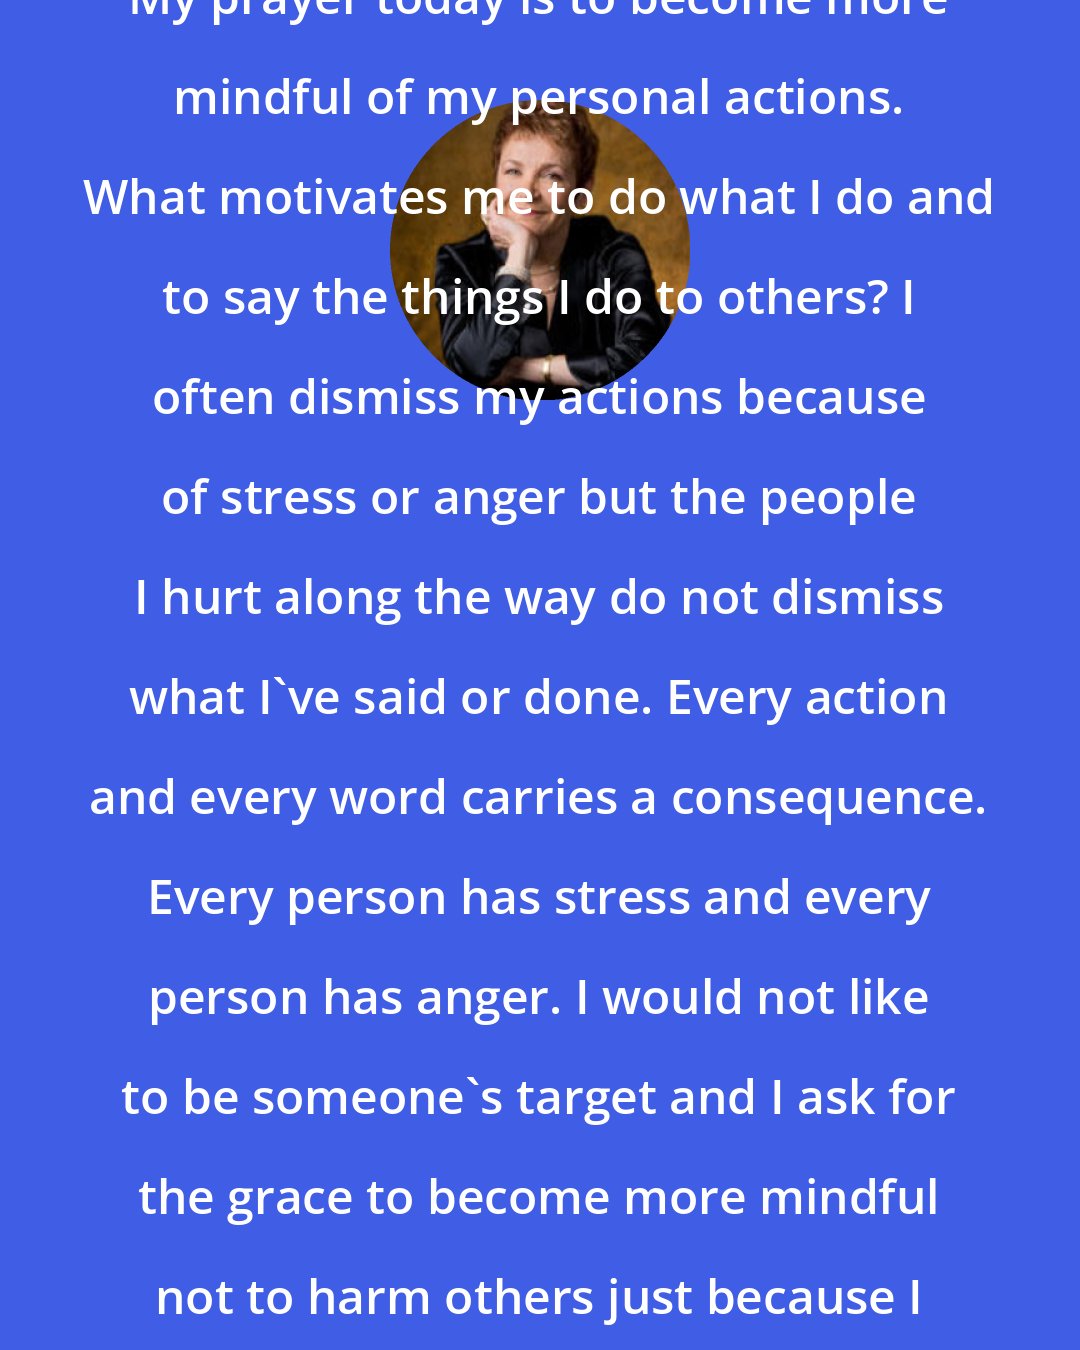 Caroline Myss: My prayer today is to become more mindful of my personal actions. What motivates me to do what I do and to say the things I do to others? I often dismiss my actions because of stress or anger but the people I hurt along the way do not dismiss what I've said or done. Every action and every word carries a consequence. Every person has stress and every person has anger. I would not like to be someone's target and I ask for the grace to become more mindful not to harm others just because I am having a bad day.